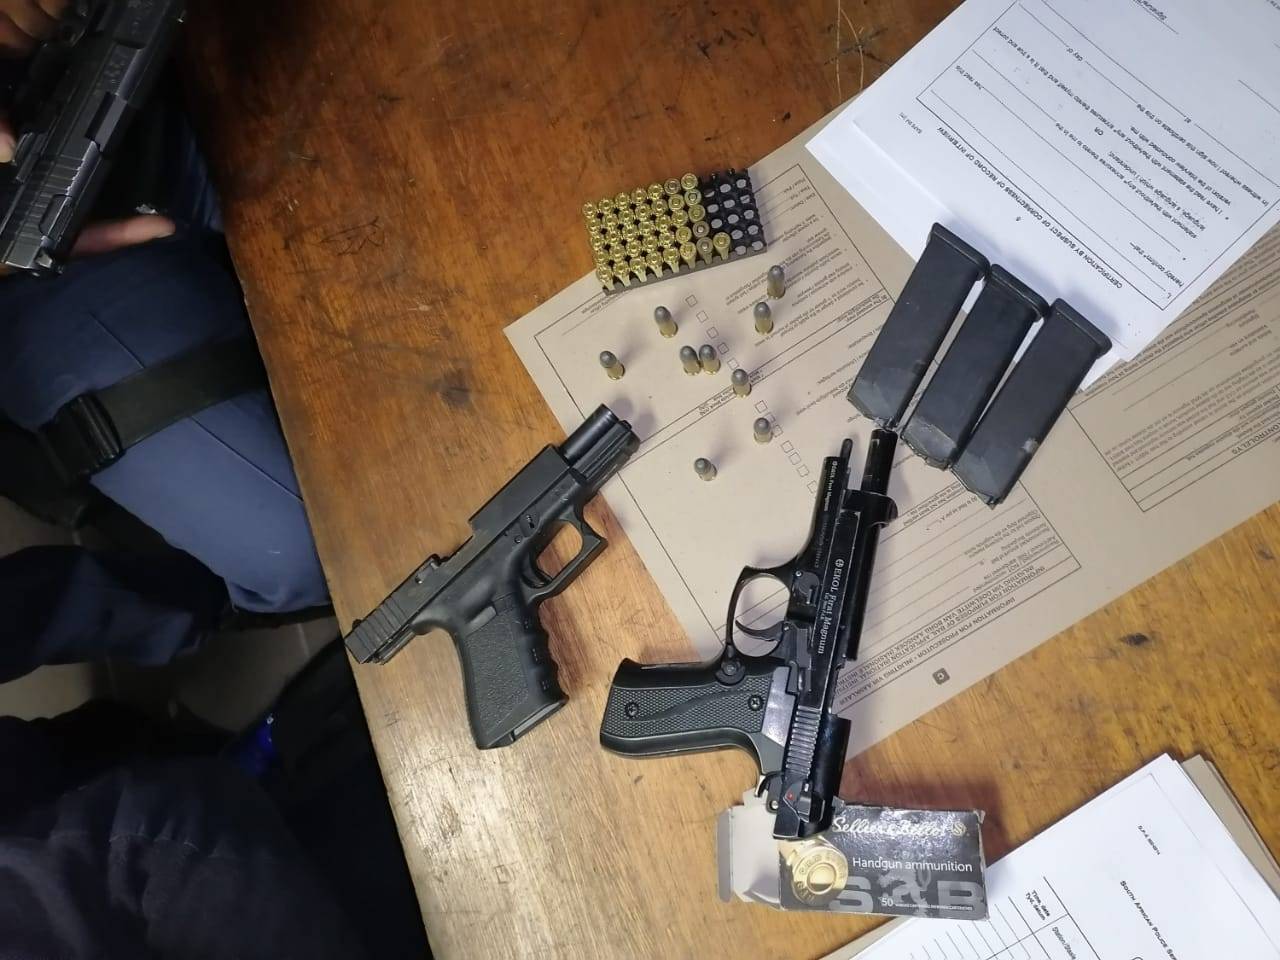 Police operations land suspects behind bars for the illegal possession of firearms